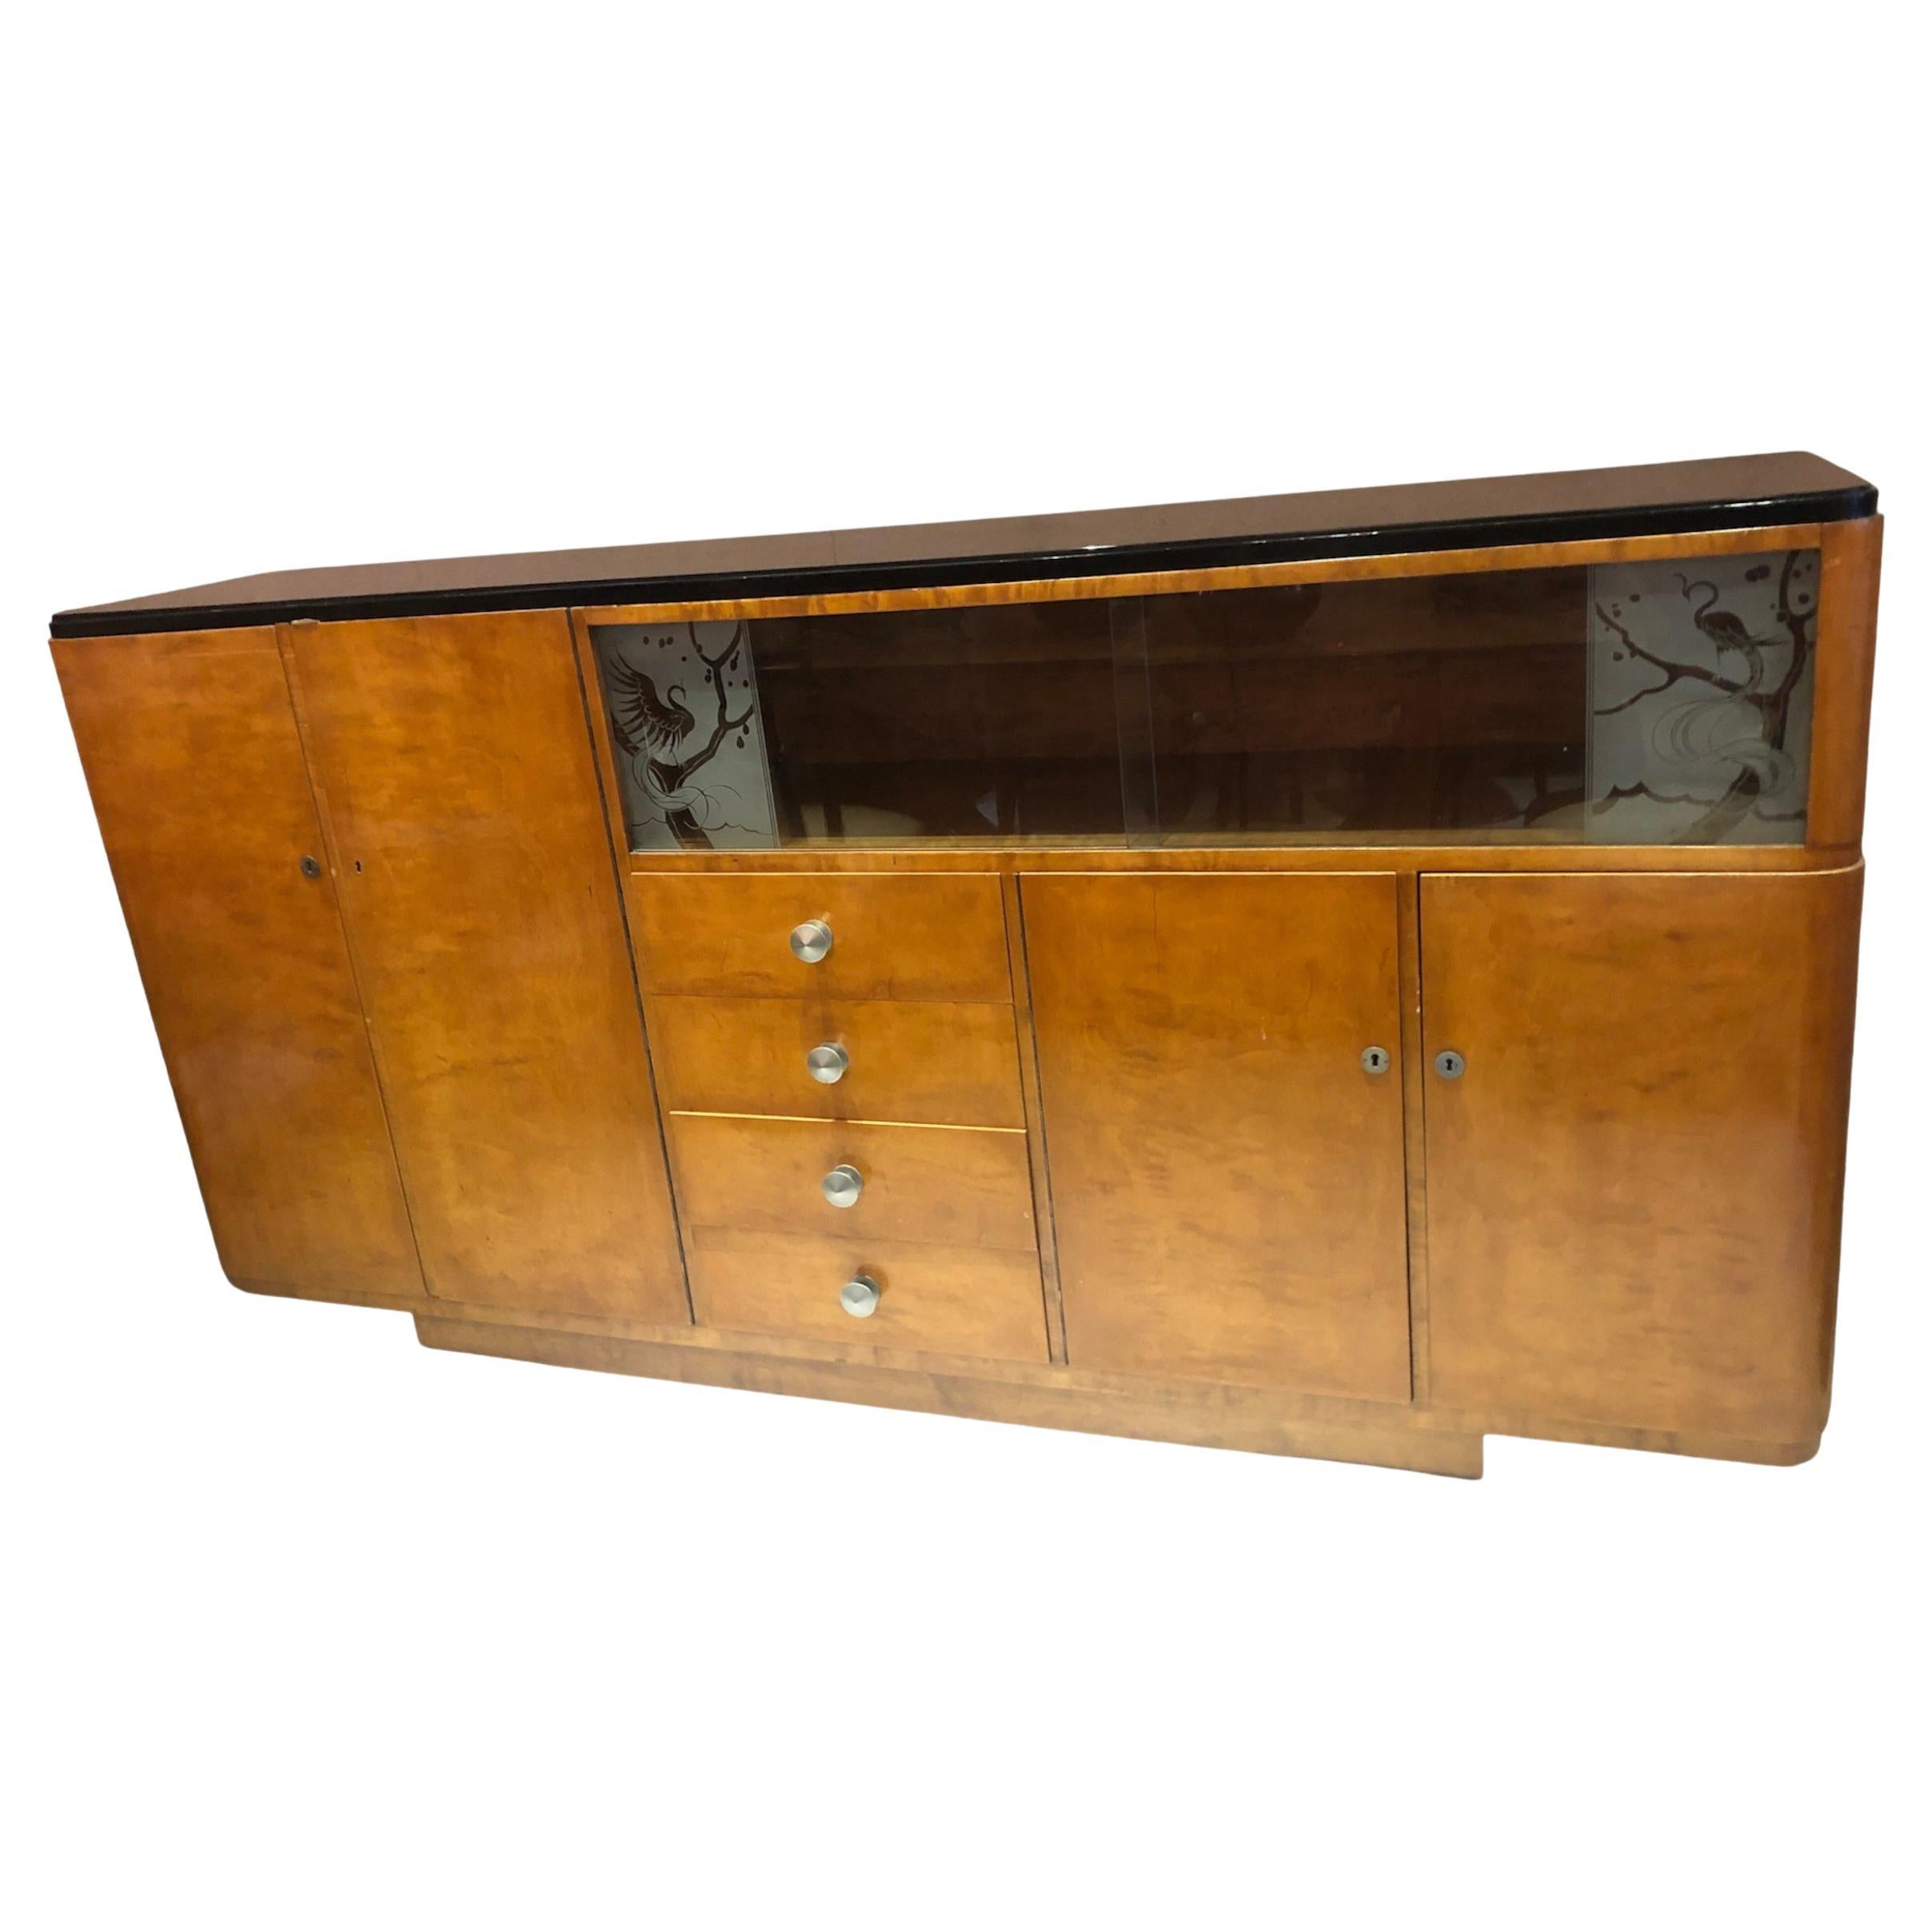 Furniture Art Deco in Wood and Glass, France, 1920 For Sale